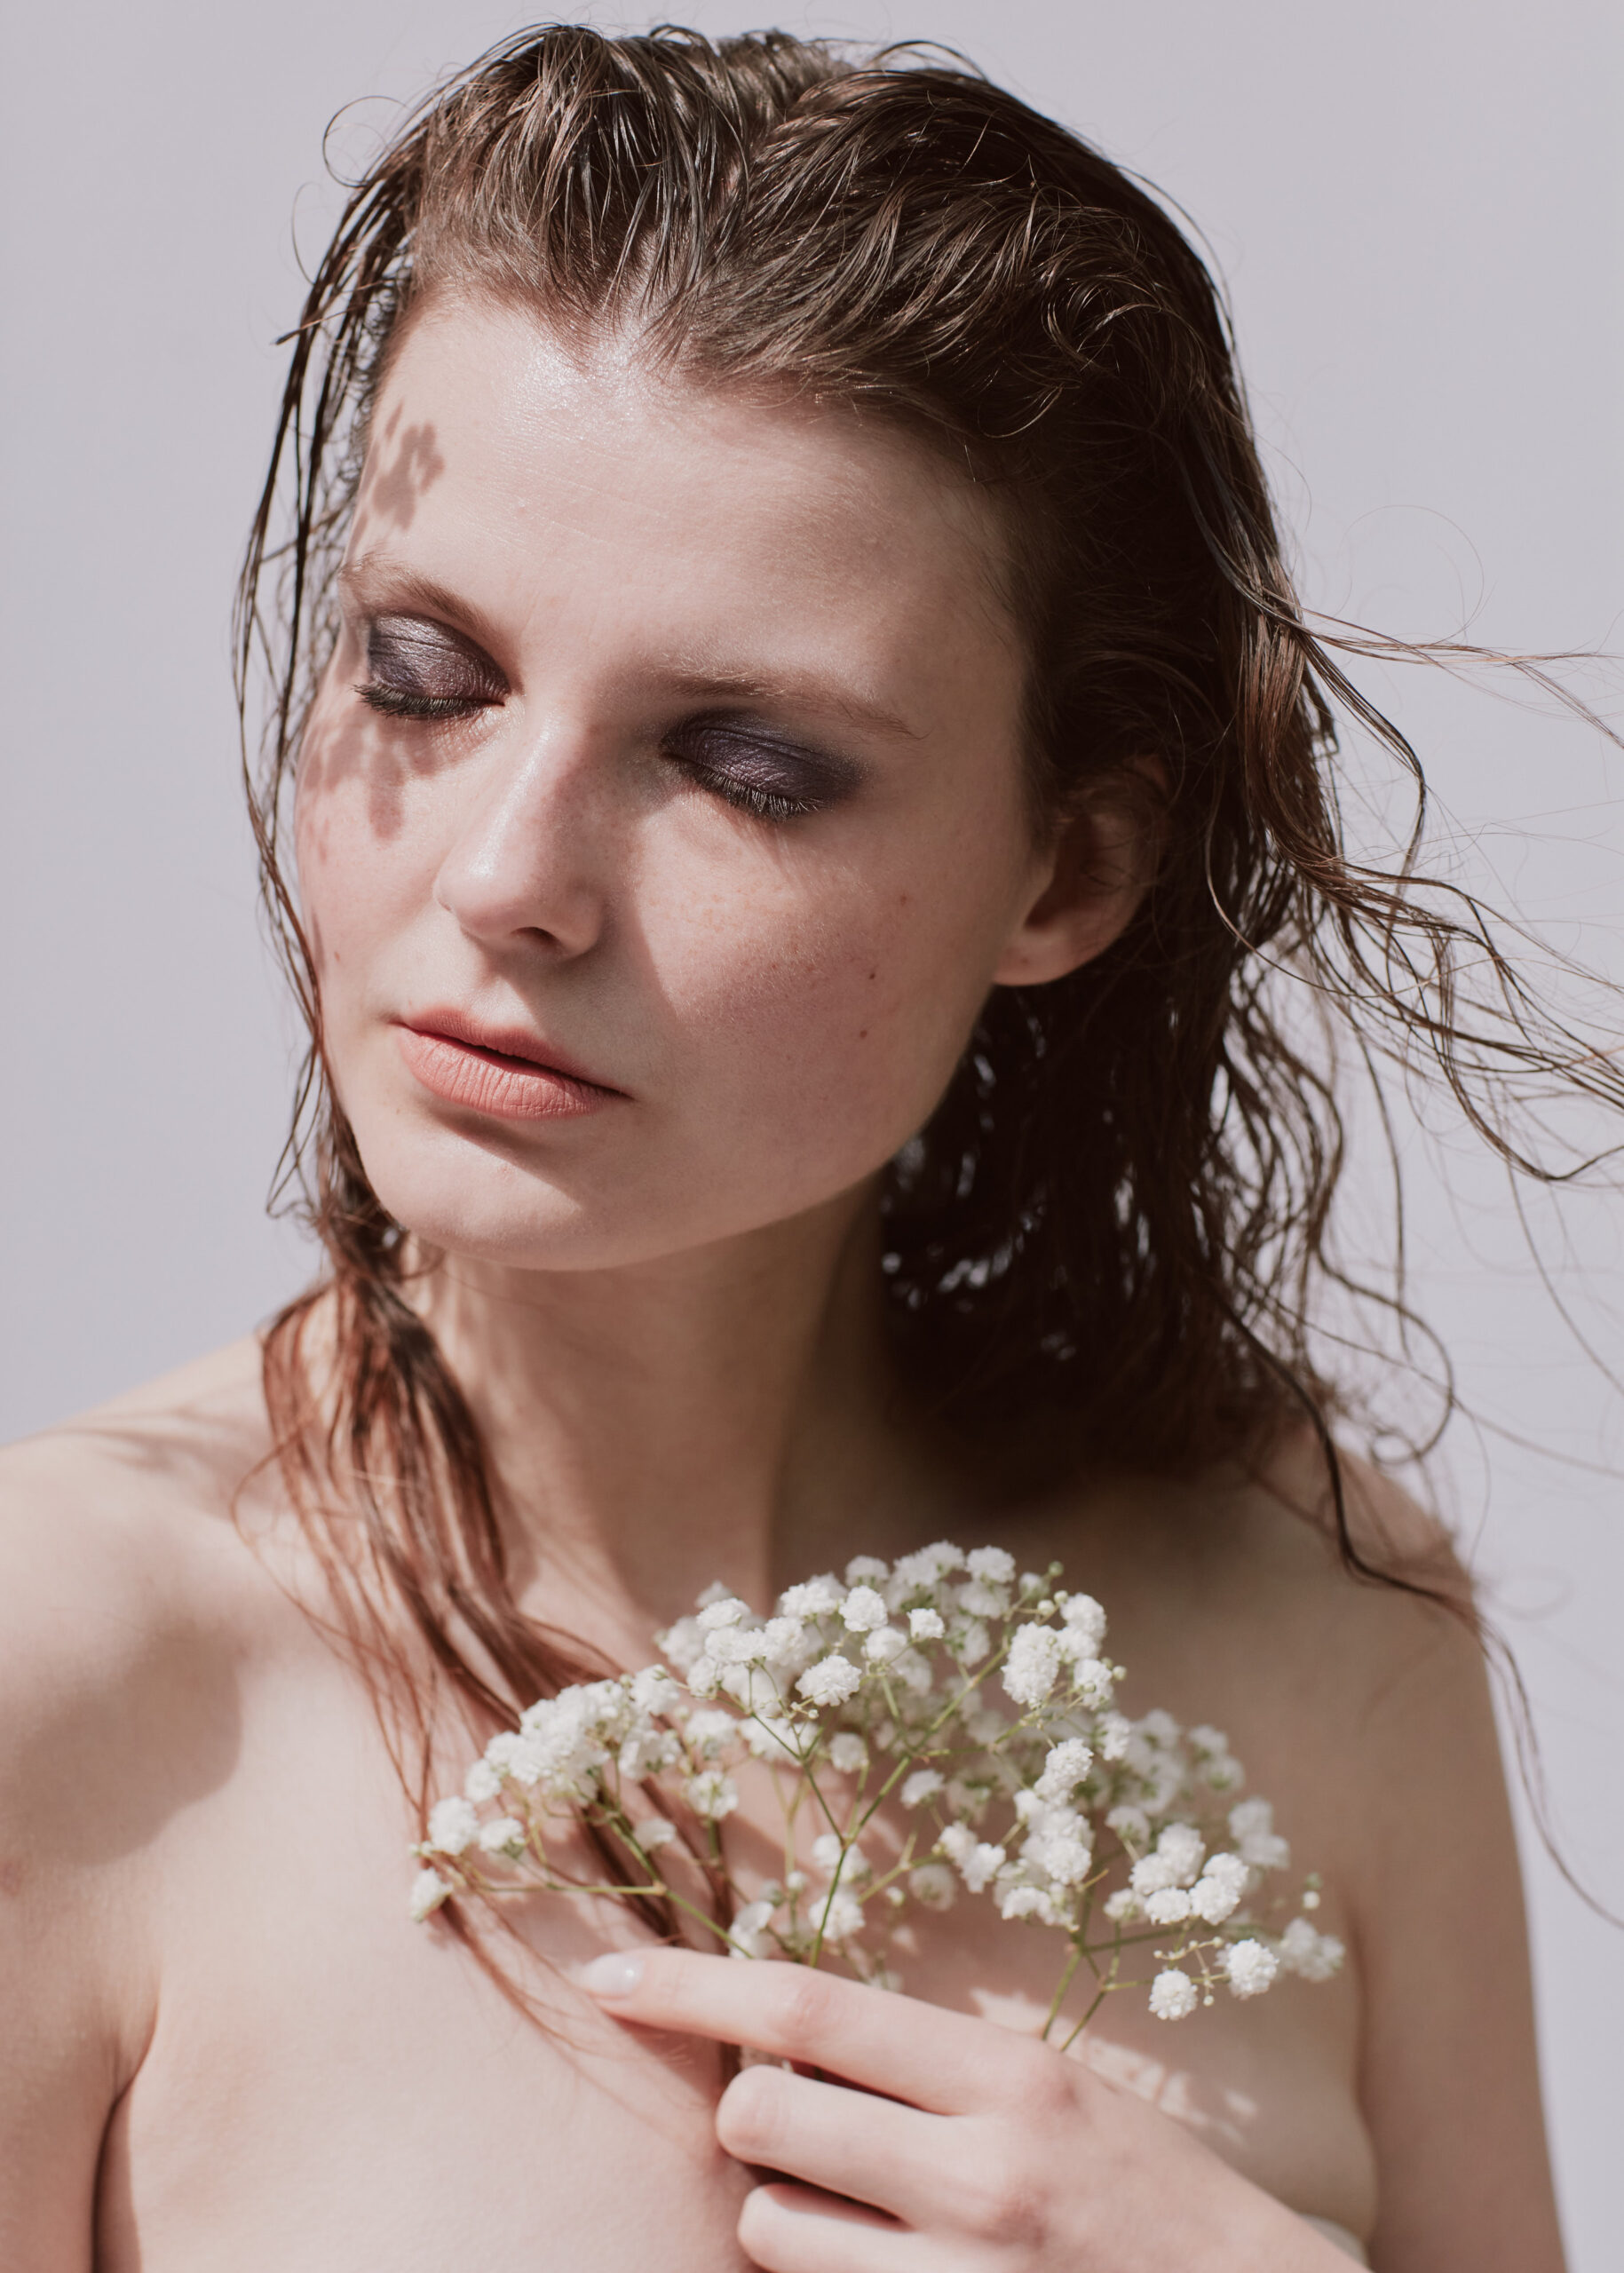 Beauty photography of model holding flowers